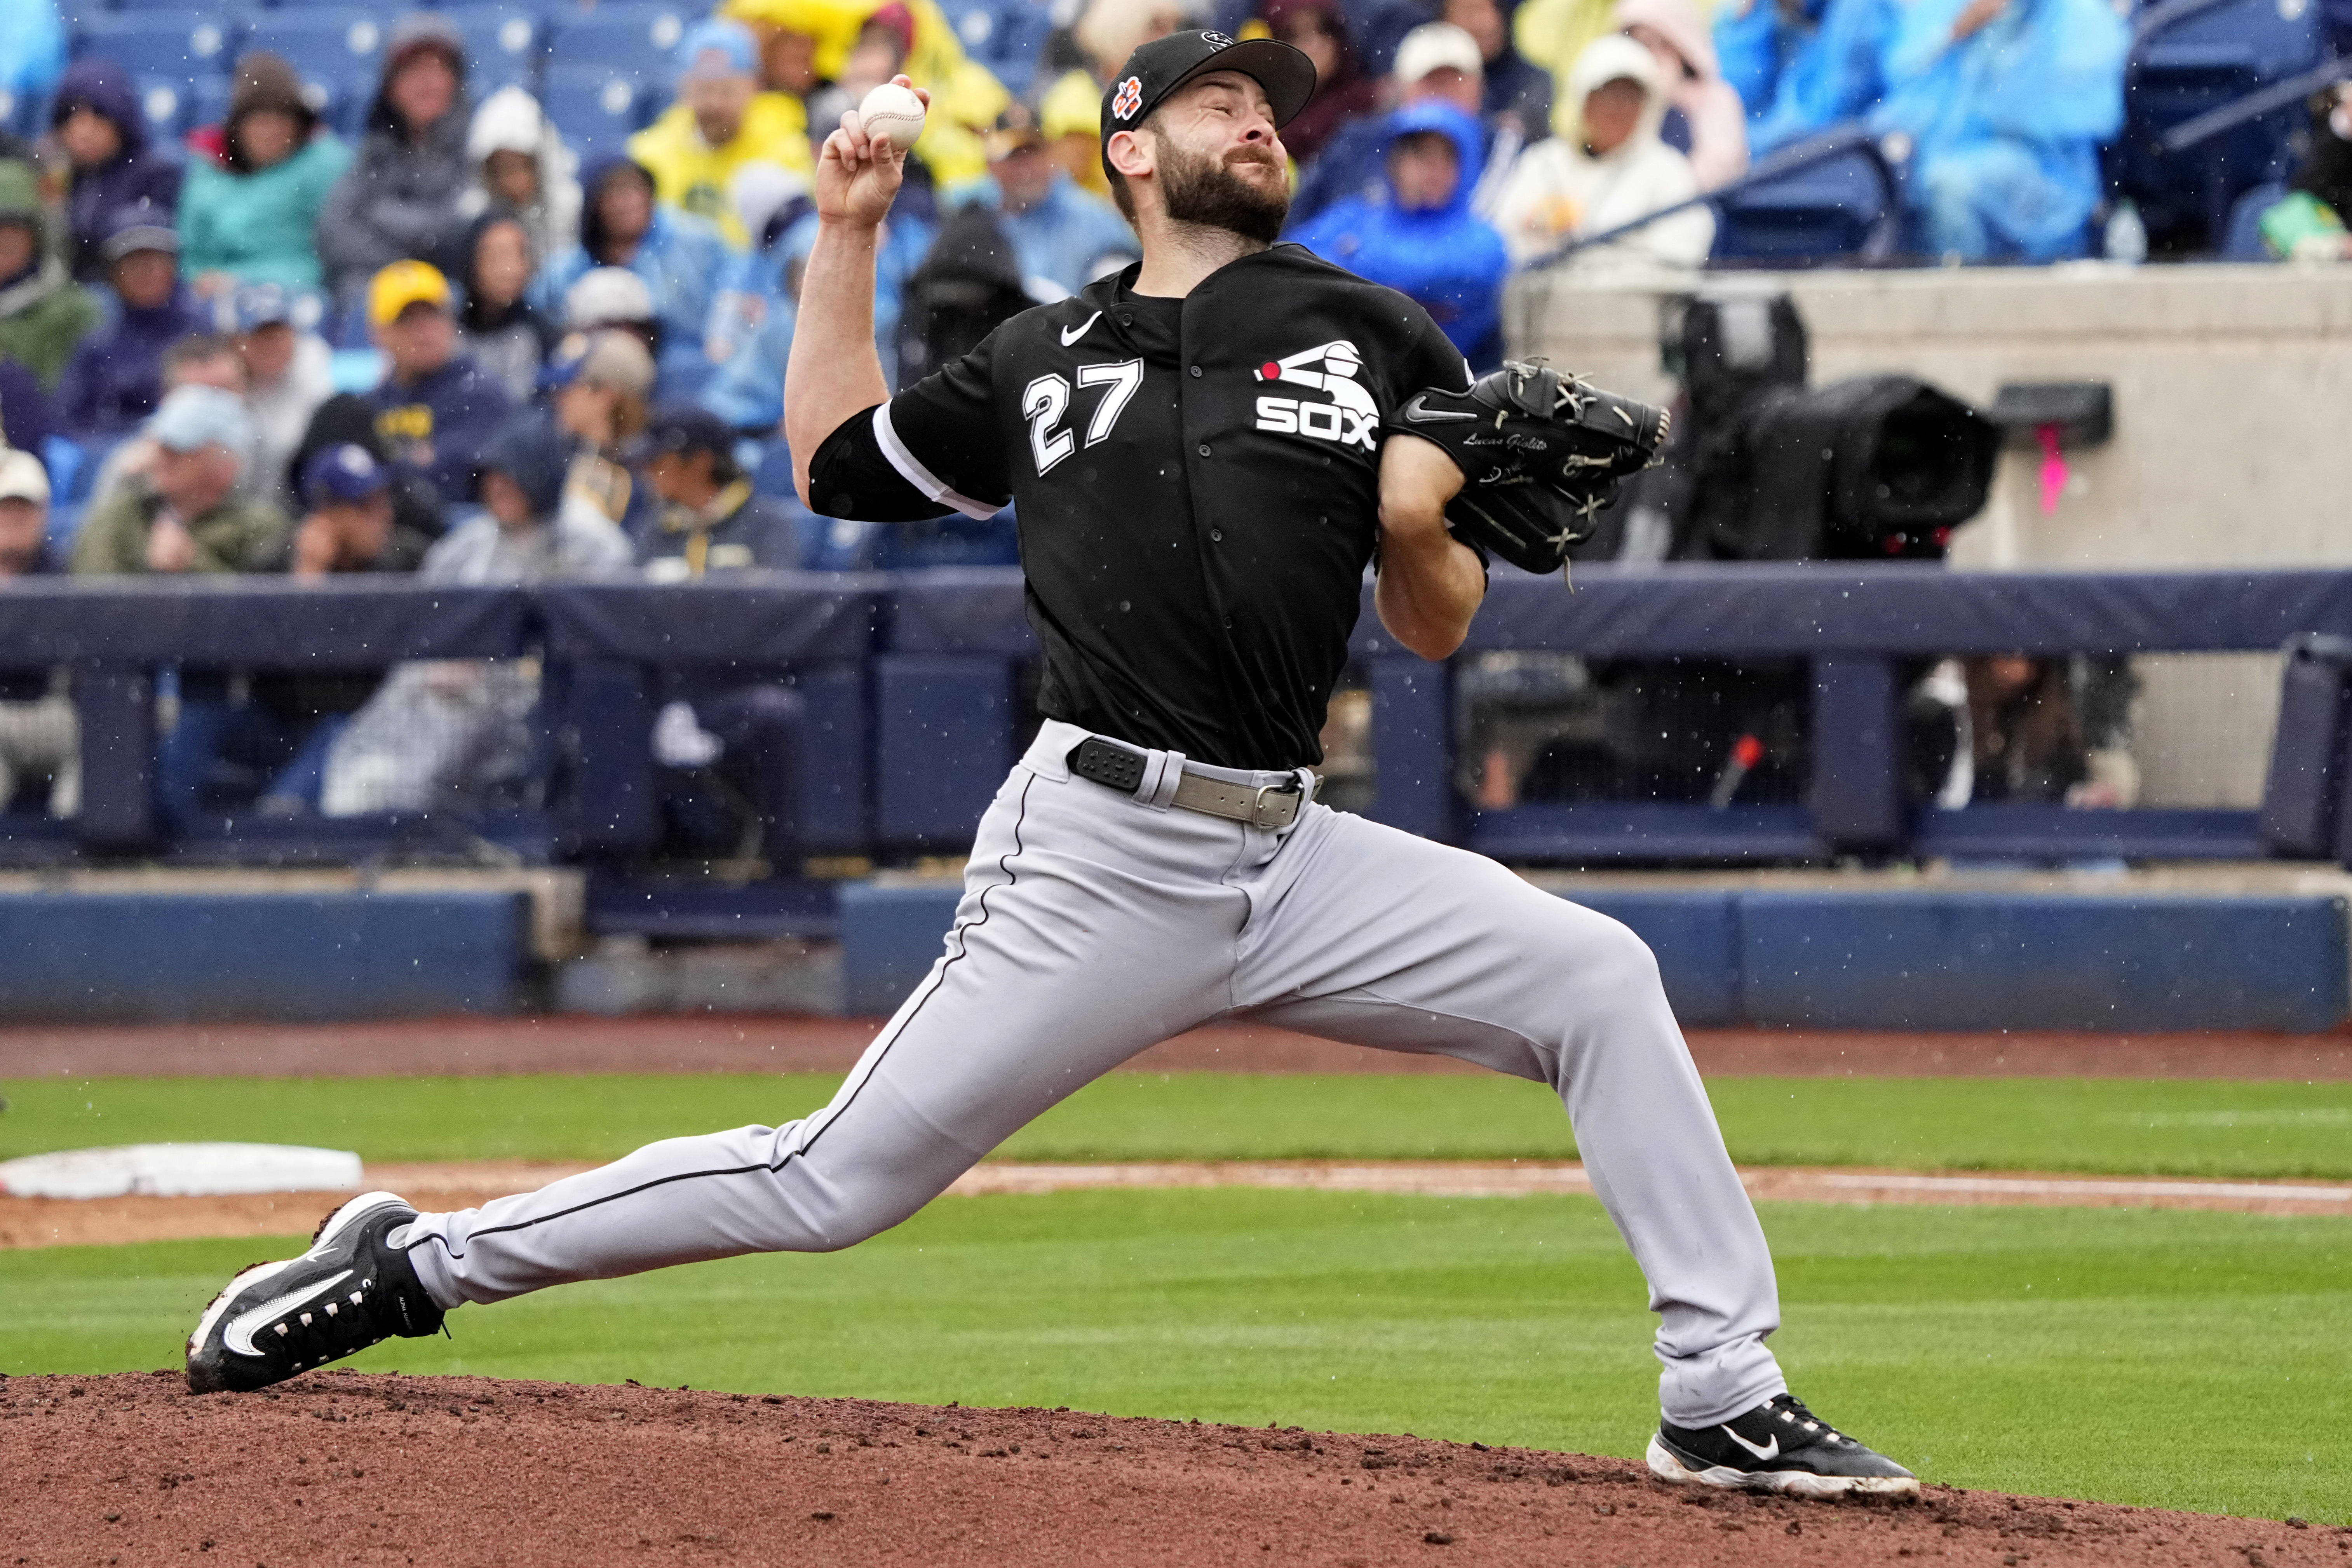 The Greatness of Giolito - NBC Sports